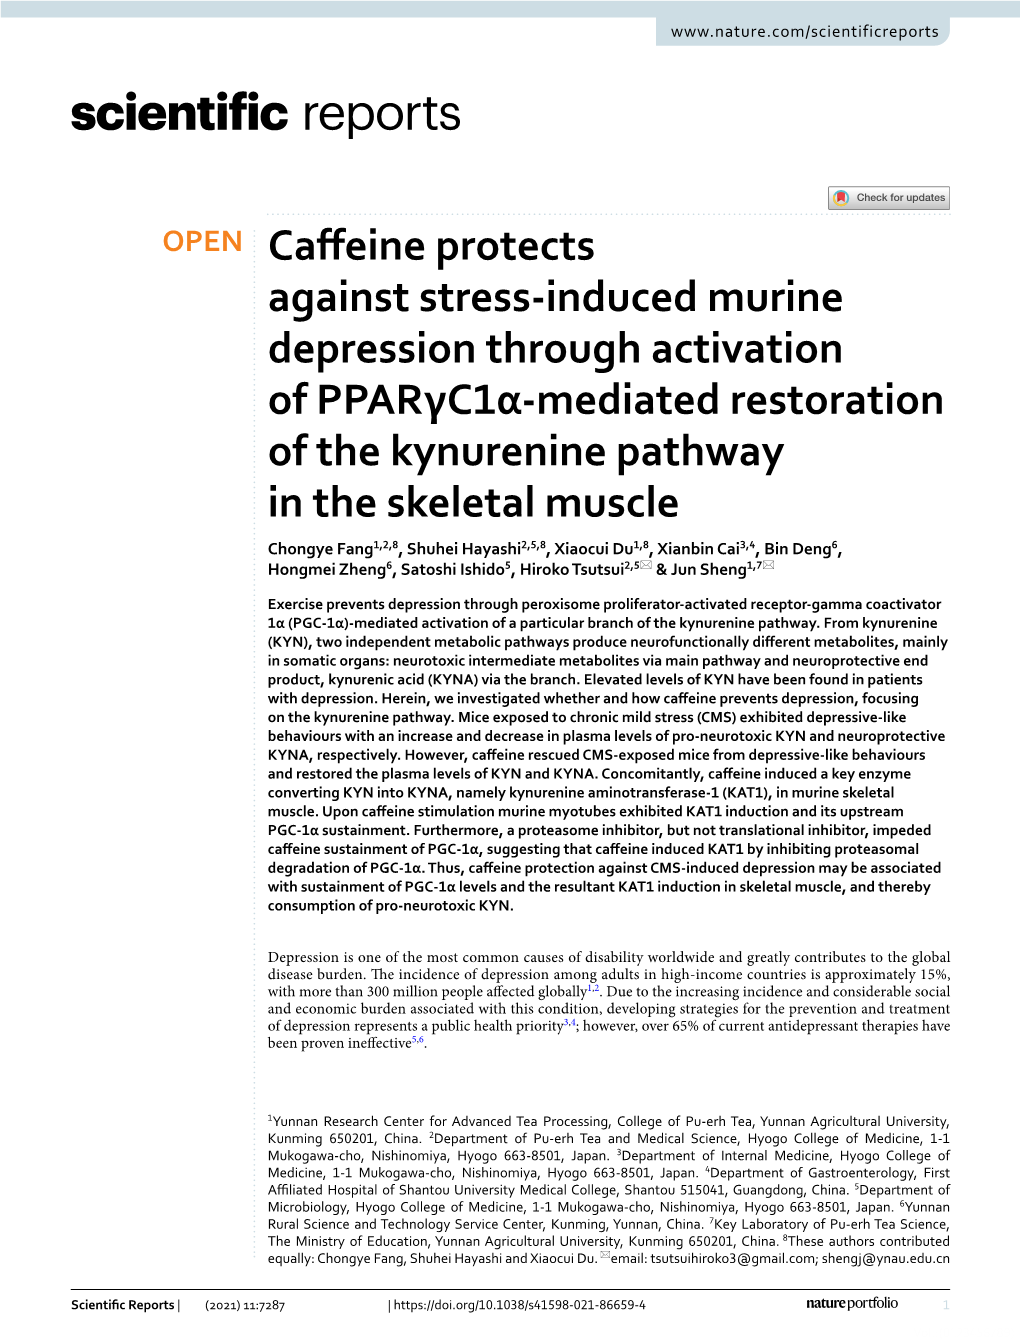 Caffeine Protects Against Stress-Induced Murine Depression